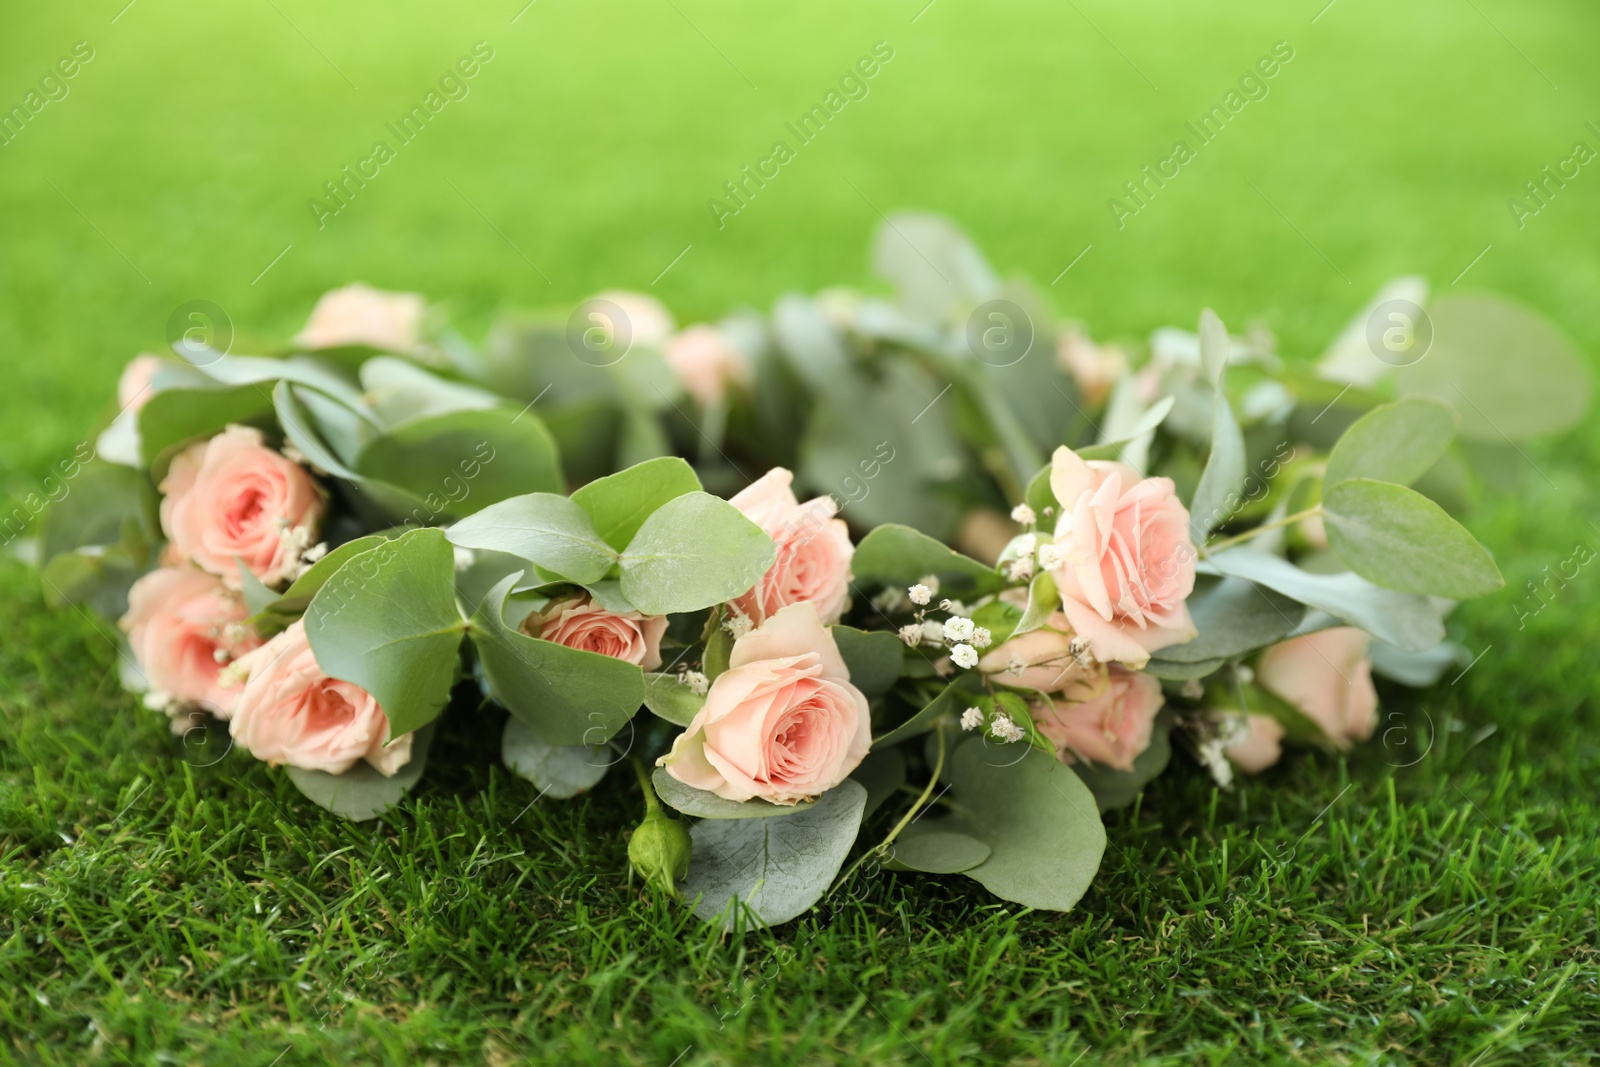 Photo of Wreath made of beautiful flowers on green grass outdoors, closeup